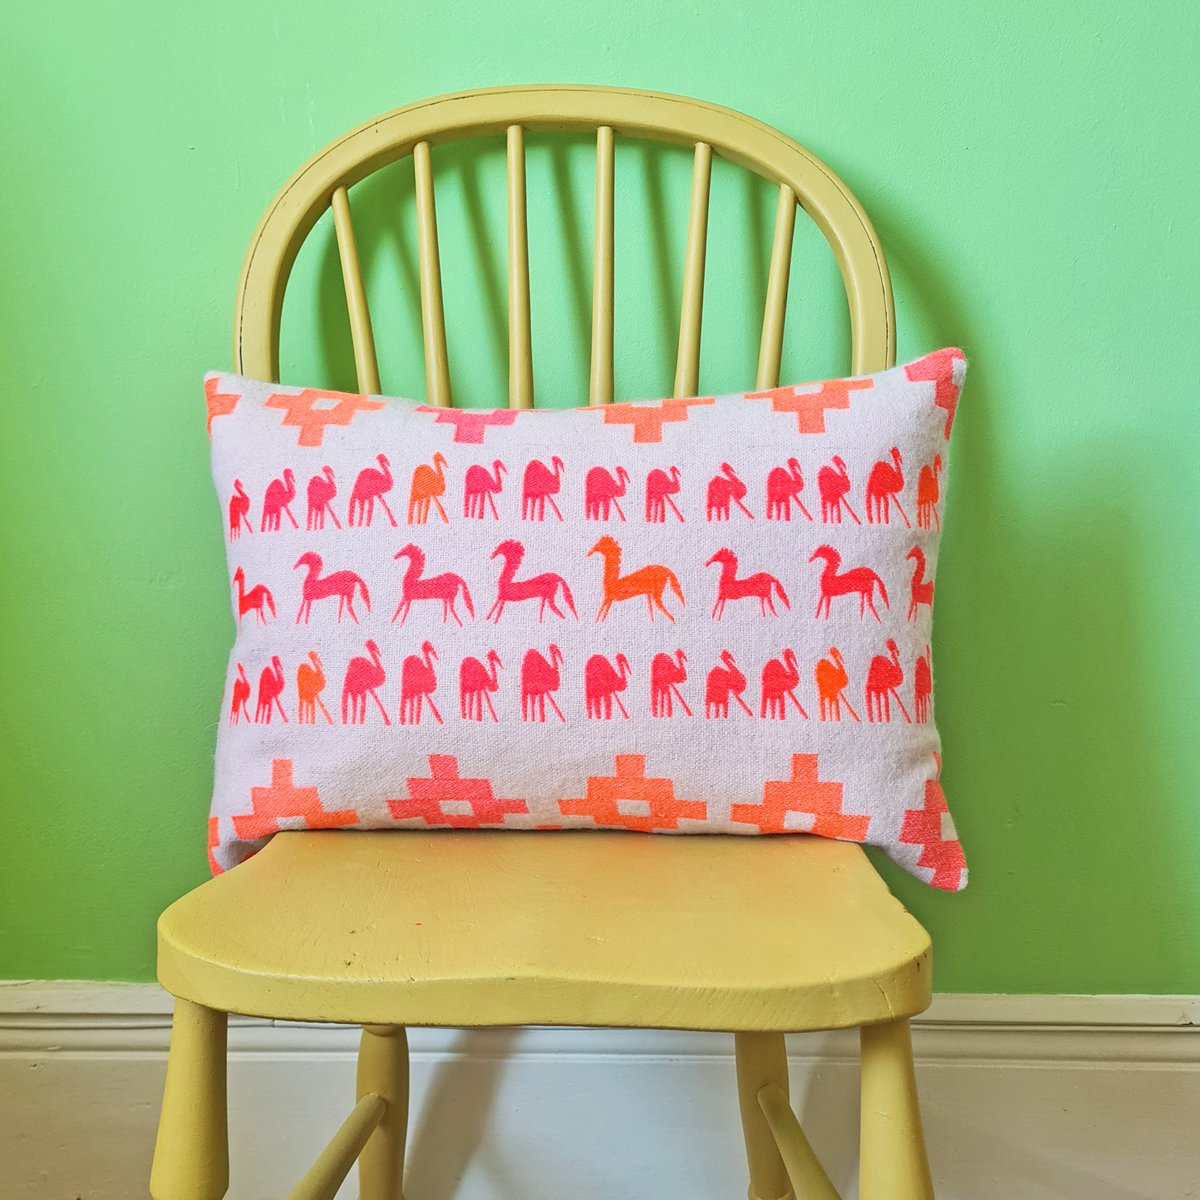 pink and orange embroidered cushion with horses and birds